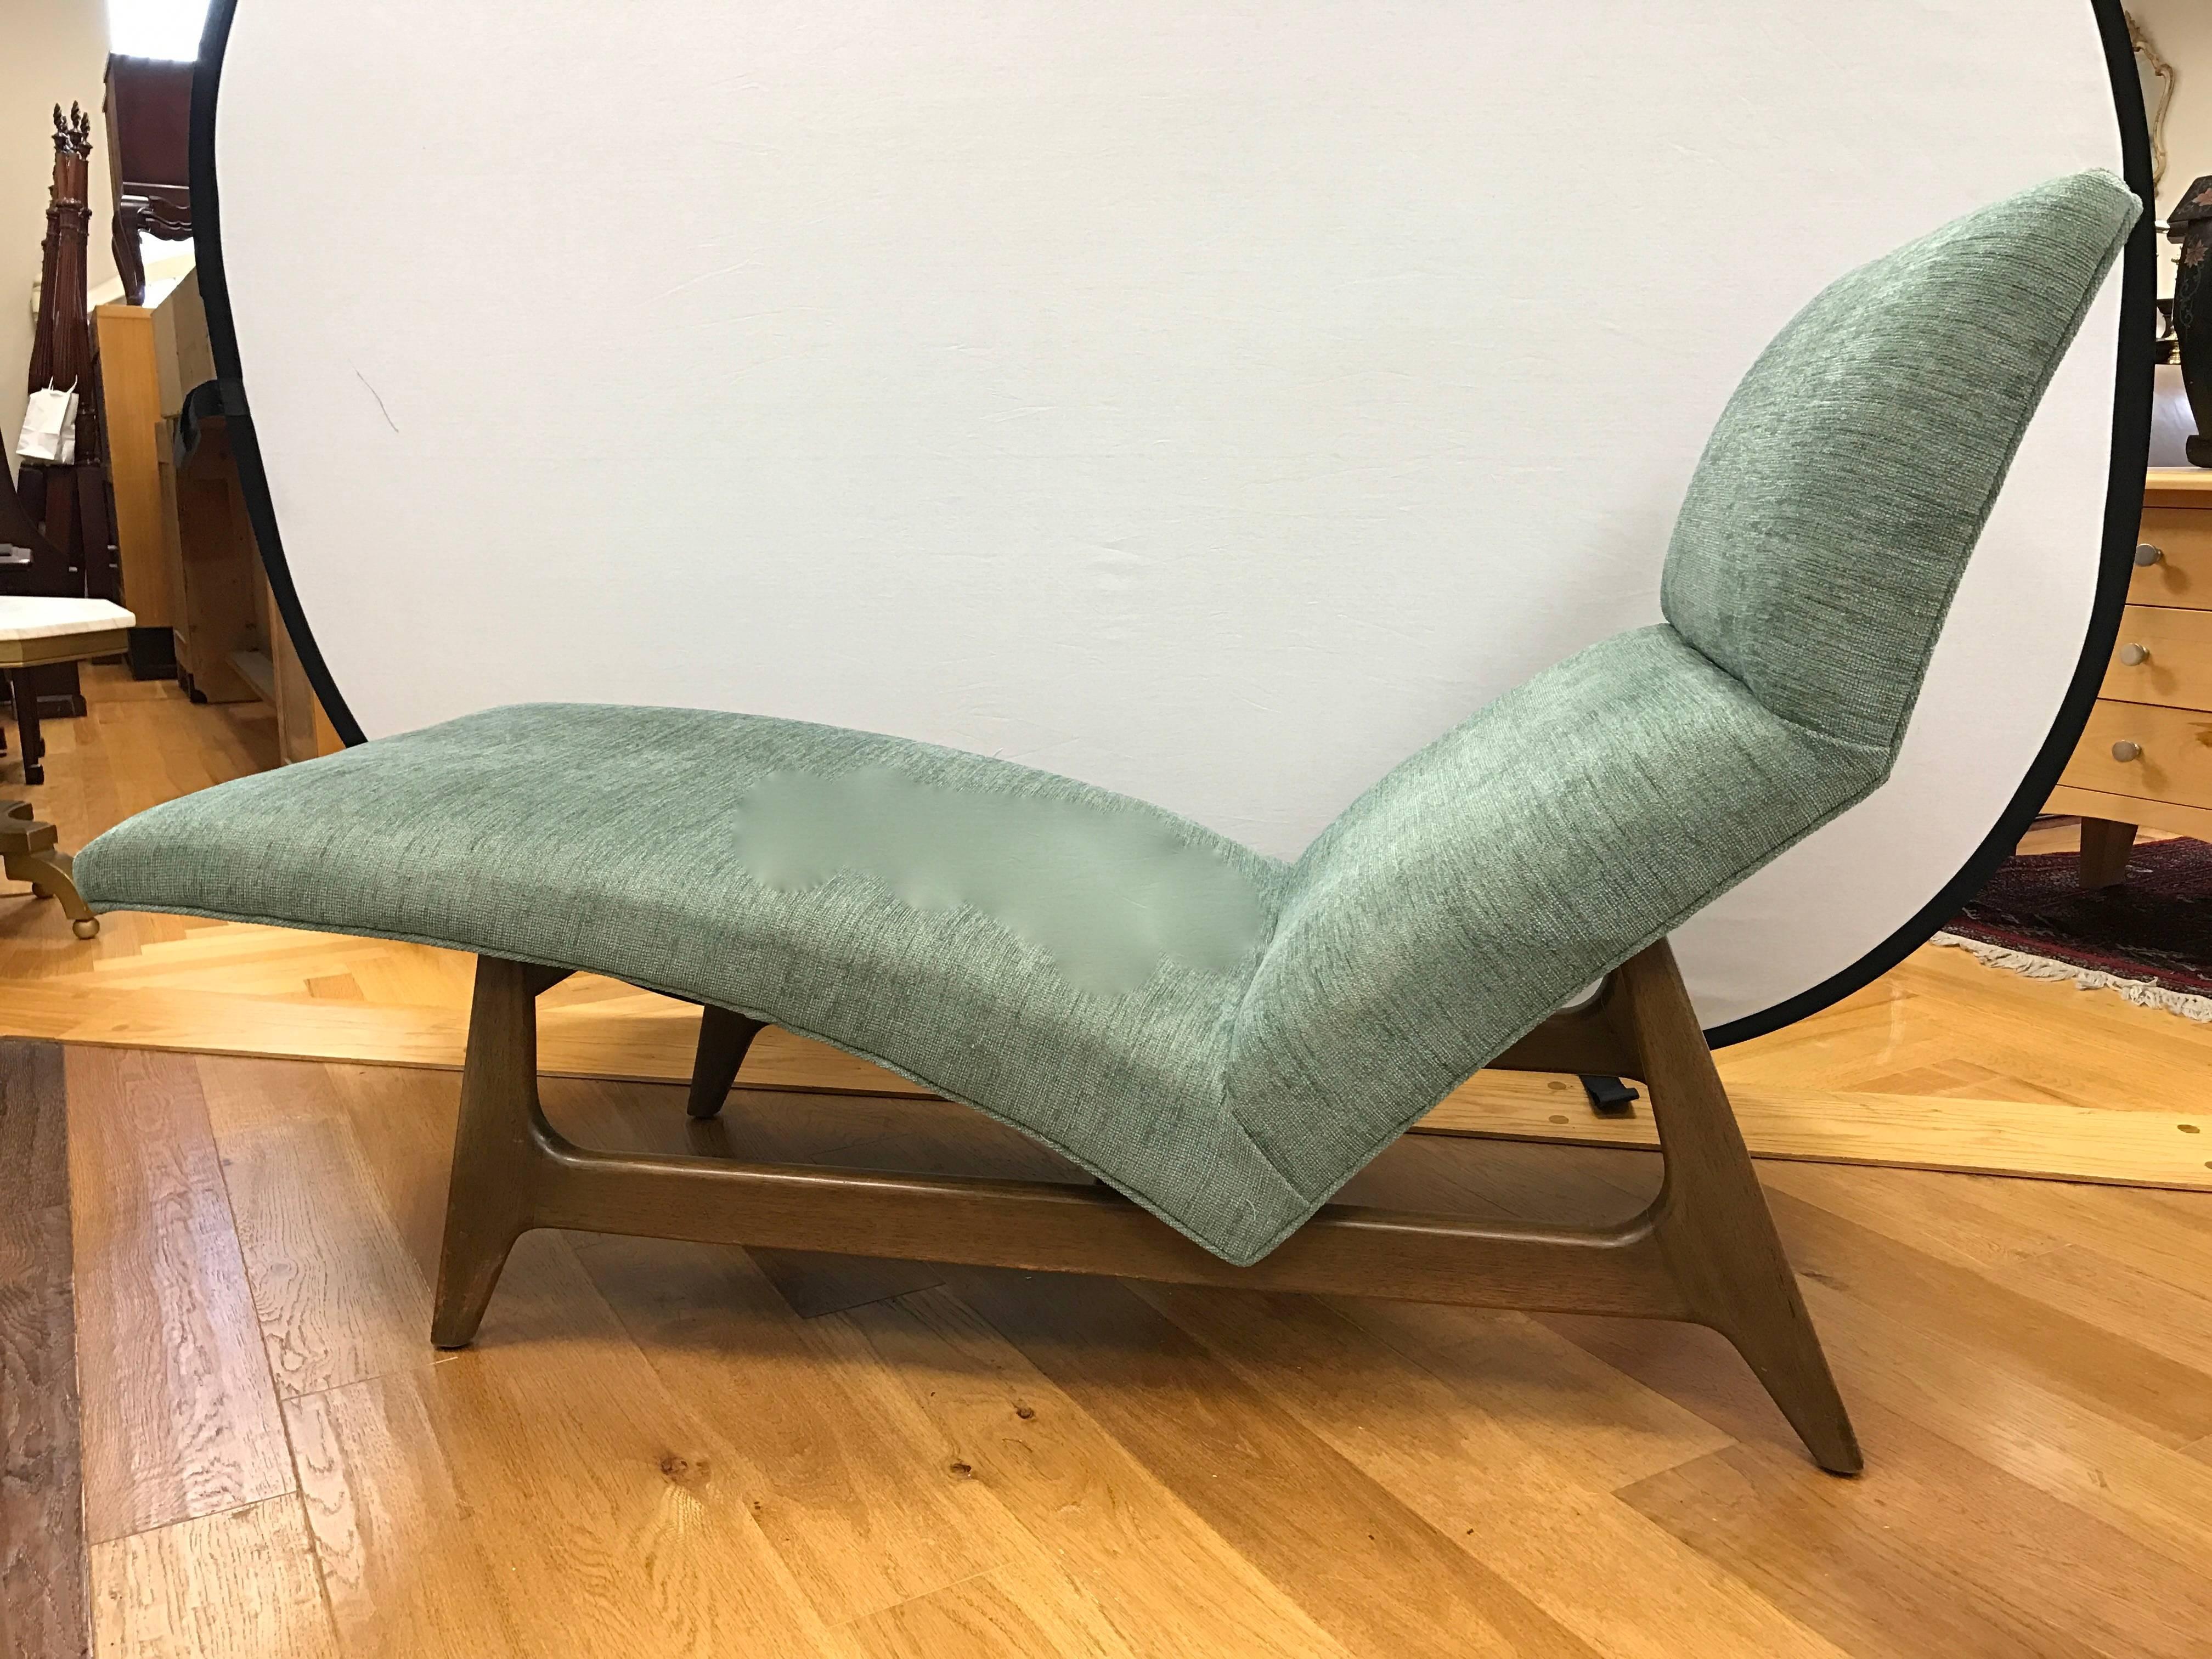 Mid-Century Modern chaise or recamier in the style of Adrian Pearsall upholstered in a rich seafoam chenille fabric. The tapered wooden legs are polished. Guaranteed to set your home apart!
 